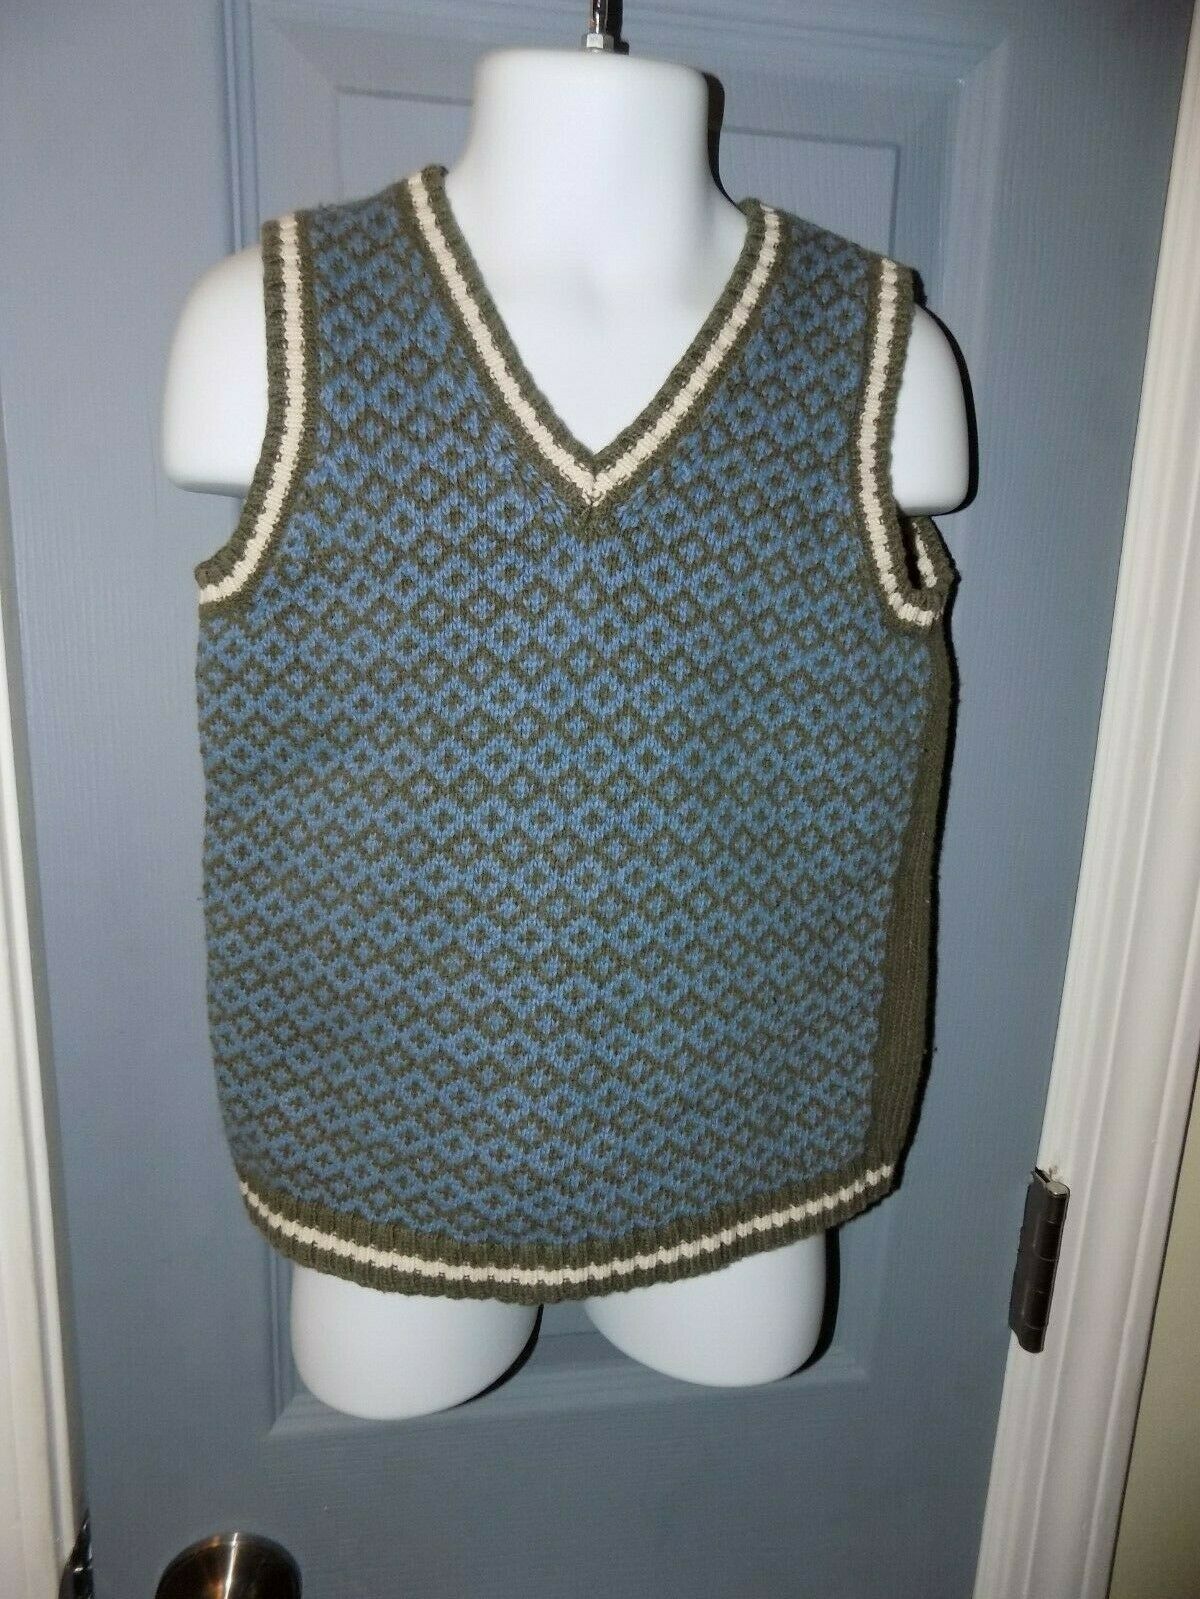 Primary image for Janie and Jack Green Sweater Vest Wool Blend Diamond Pattern Size 4T/5T Boy's